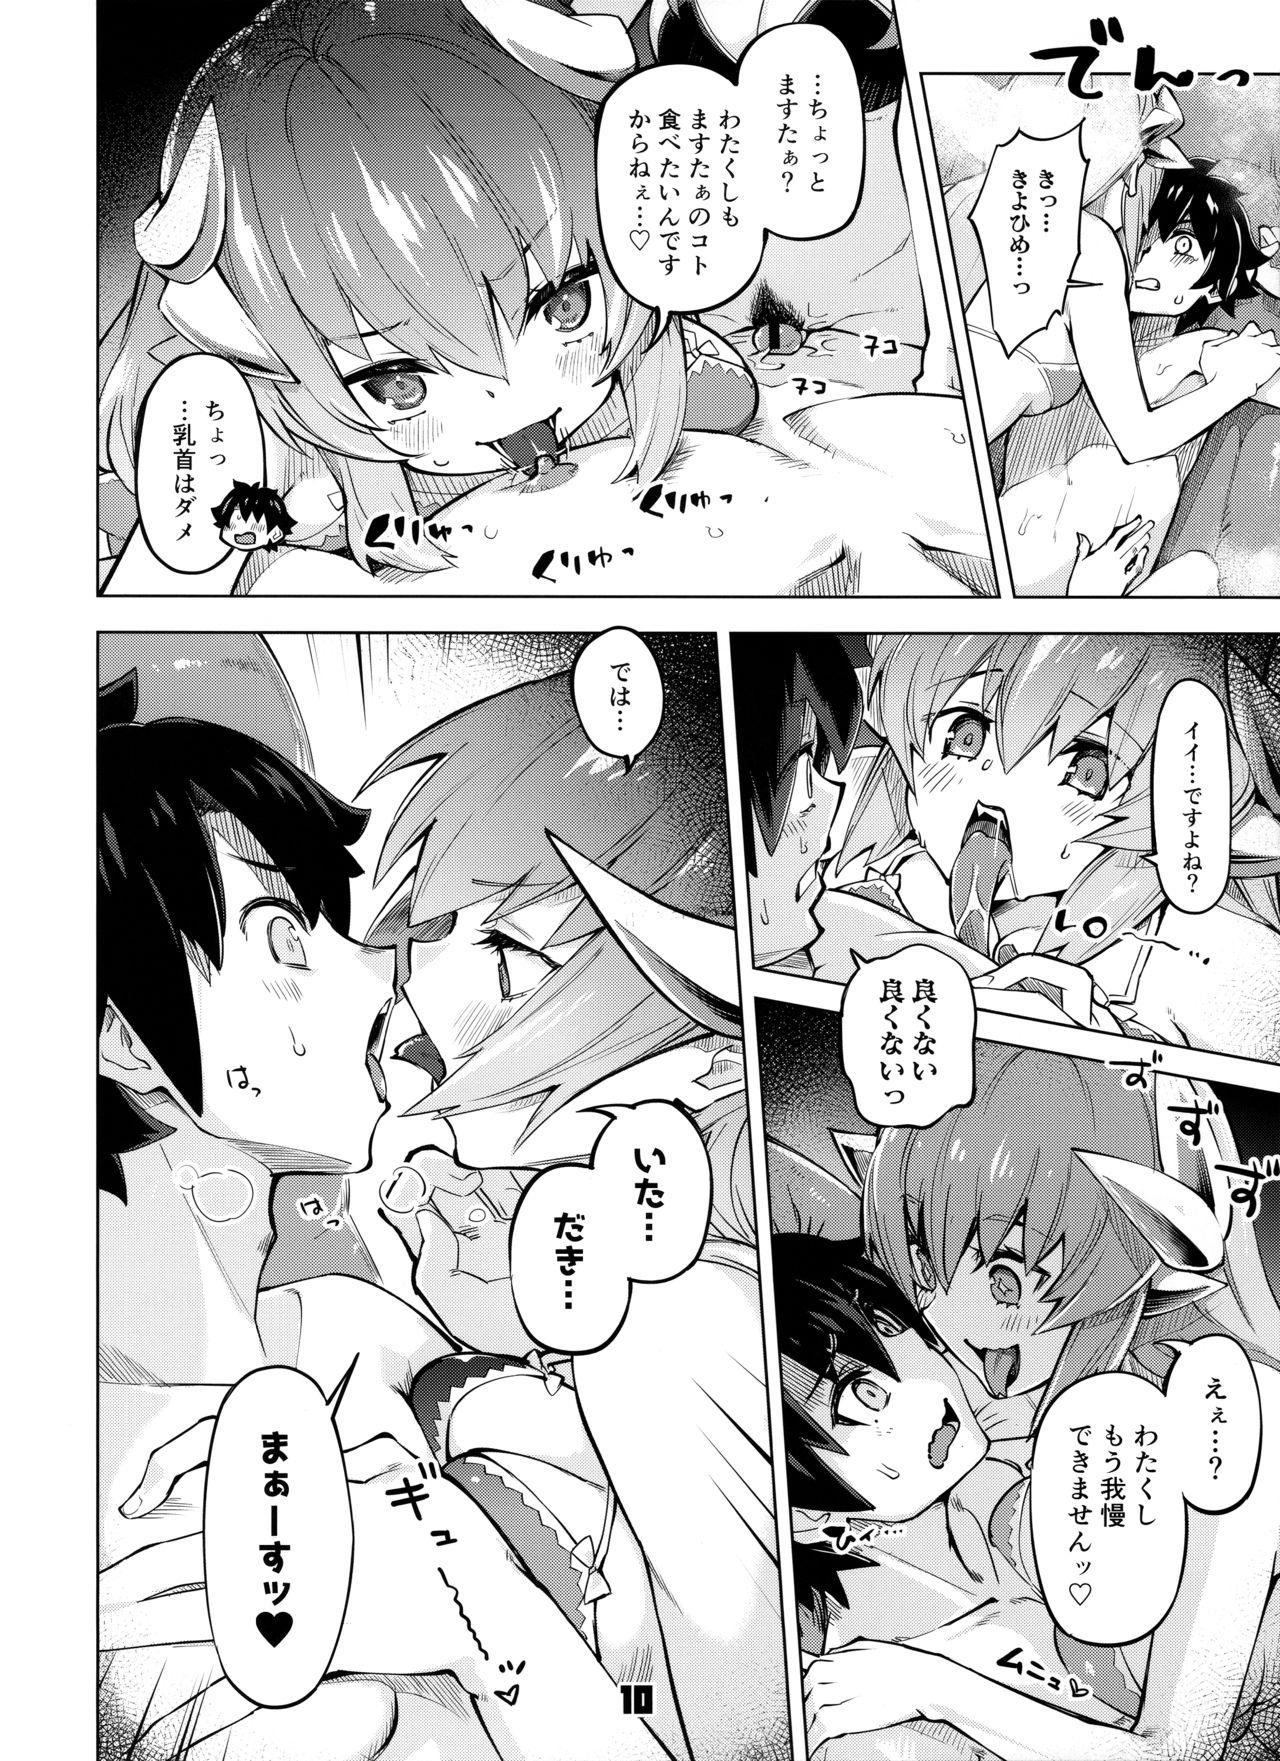 Punished Sex Shinai to Derarenai My Room 2 - My room can not go out - Fate grand order Gay Straight Boys - Page 9